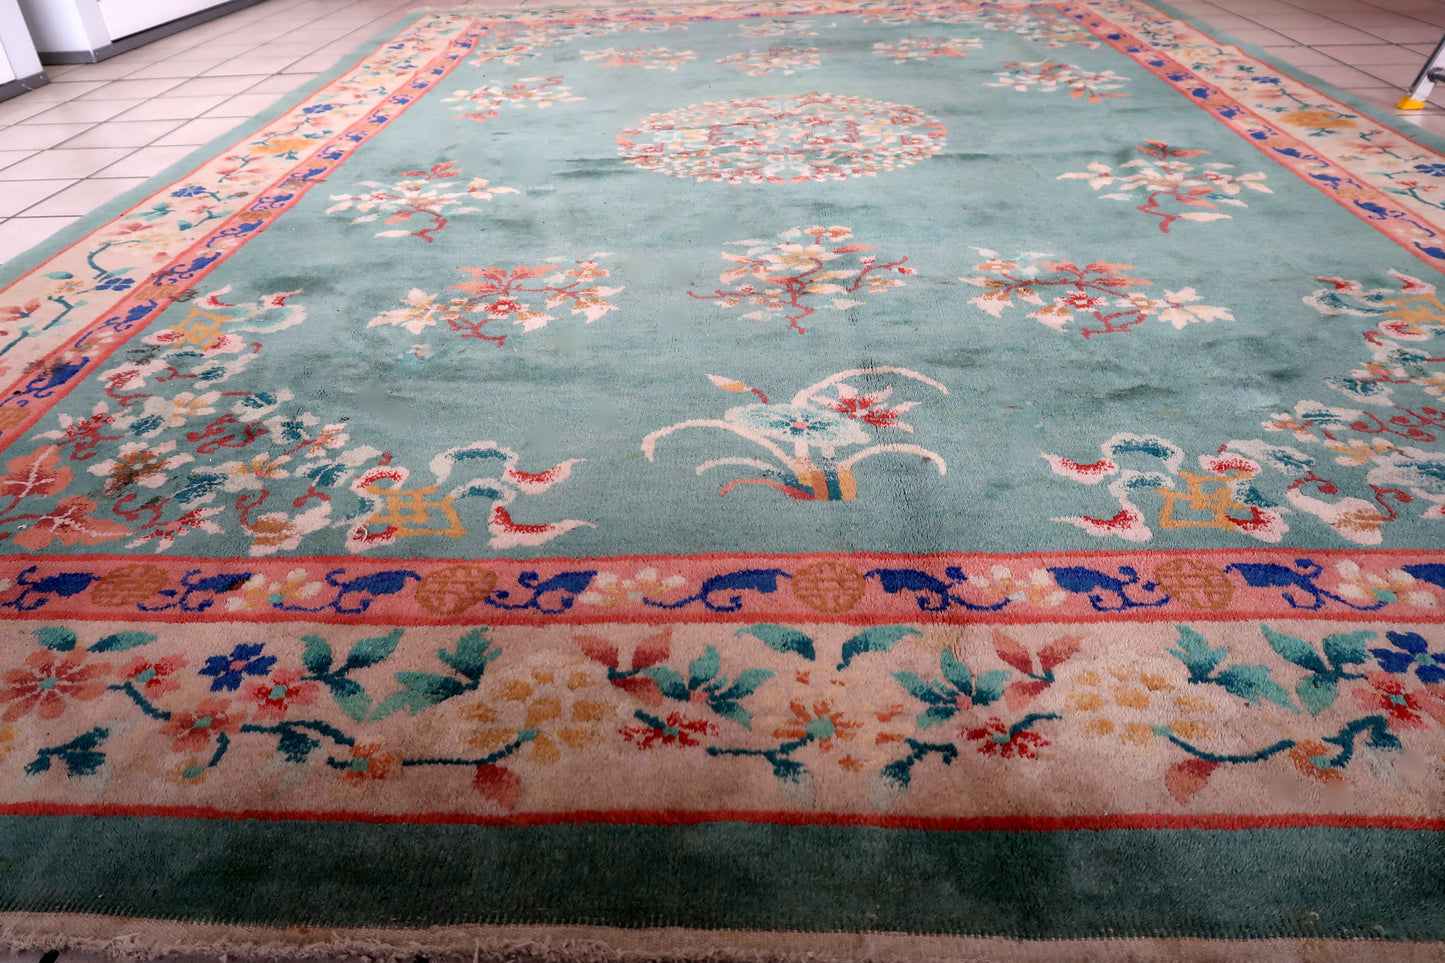 A captivating piece of history in rug form.